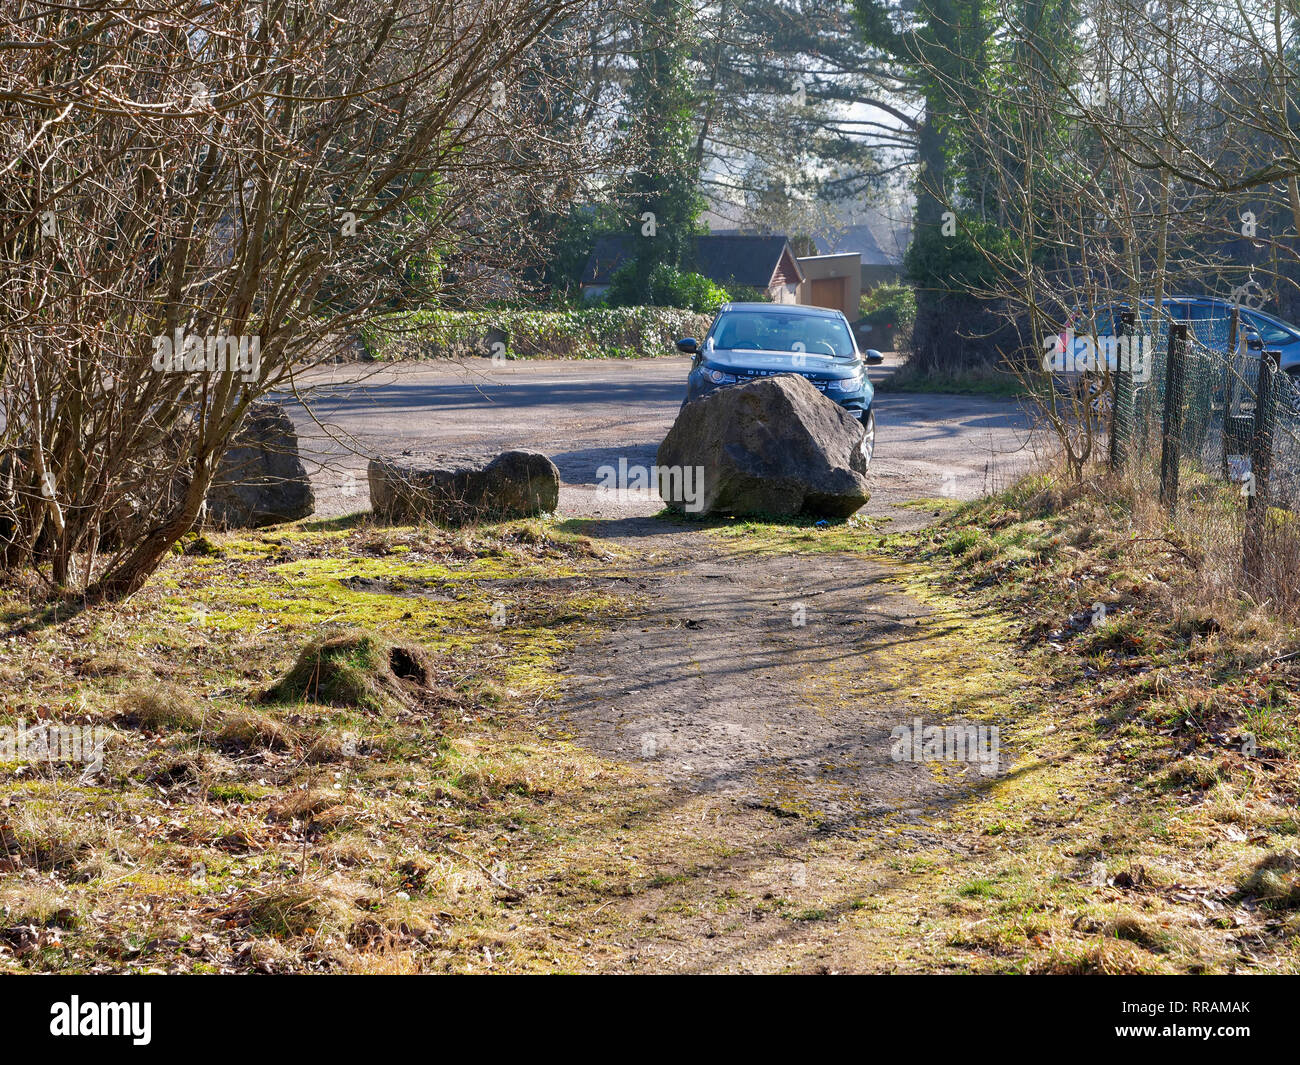 Wirksworth, Derbyshire, UK. 25th Feb, 2019. Local beauty spot under threat by Gypsy Roma Traveller camp after Councillors from Derbyshire Dales District Council apologised to the residents of Wirksworth for having to make the decision, commenting that they 'wouldn’t wish it on anyone', Councillor Mike Ratcliffe called that decision a 'partisan political manoeuvre', Stoney Wood, Wirksworth, Derbyshire Dales. Land has been allocated as a 6 month temporary tolerated site. DDDC plan to cut down all the trees on the site to make room for the Travellers camp. Credit: Doug Blane/Alamy Live News Stock Photo